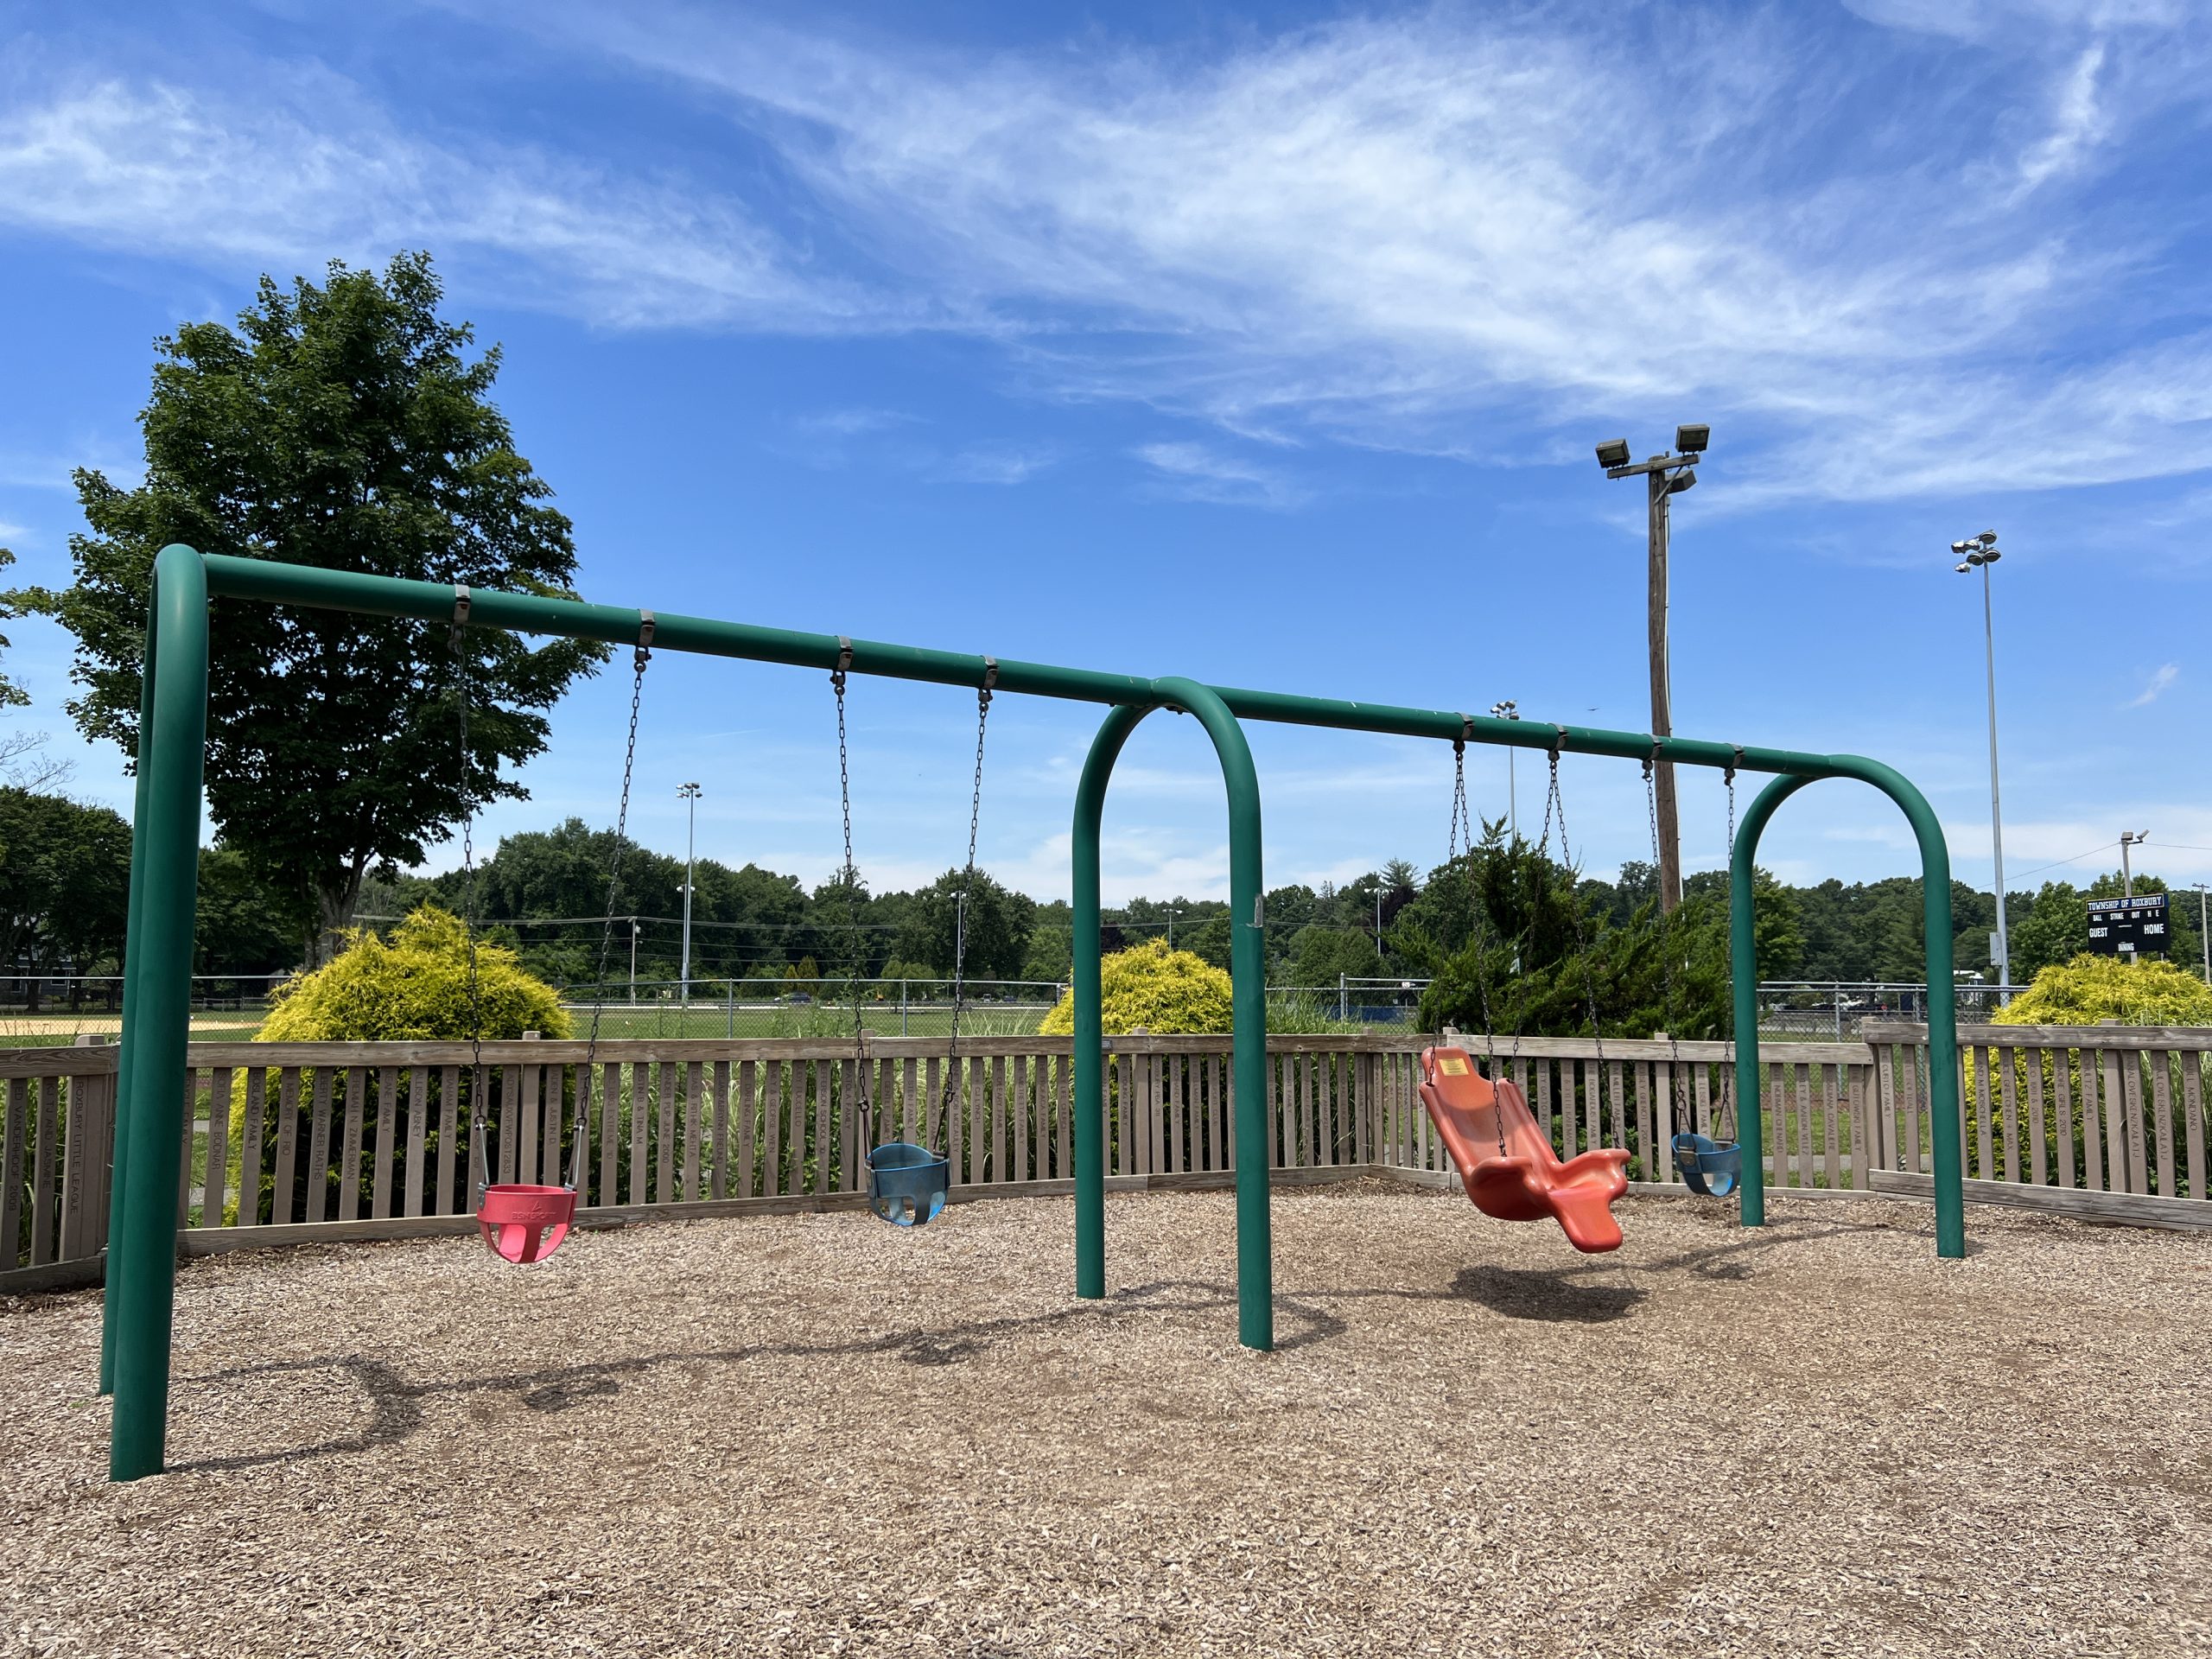 TOT LOT at Imagination Station Playground in Roxbury NJ - SWINGS 3 baby and 1 angled bucket swing